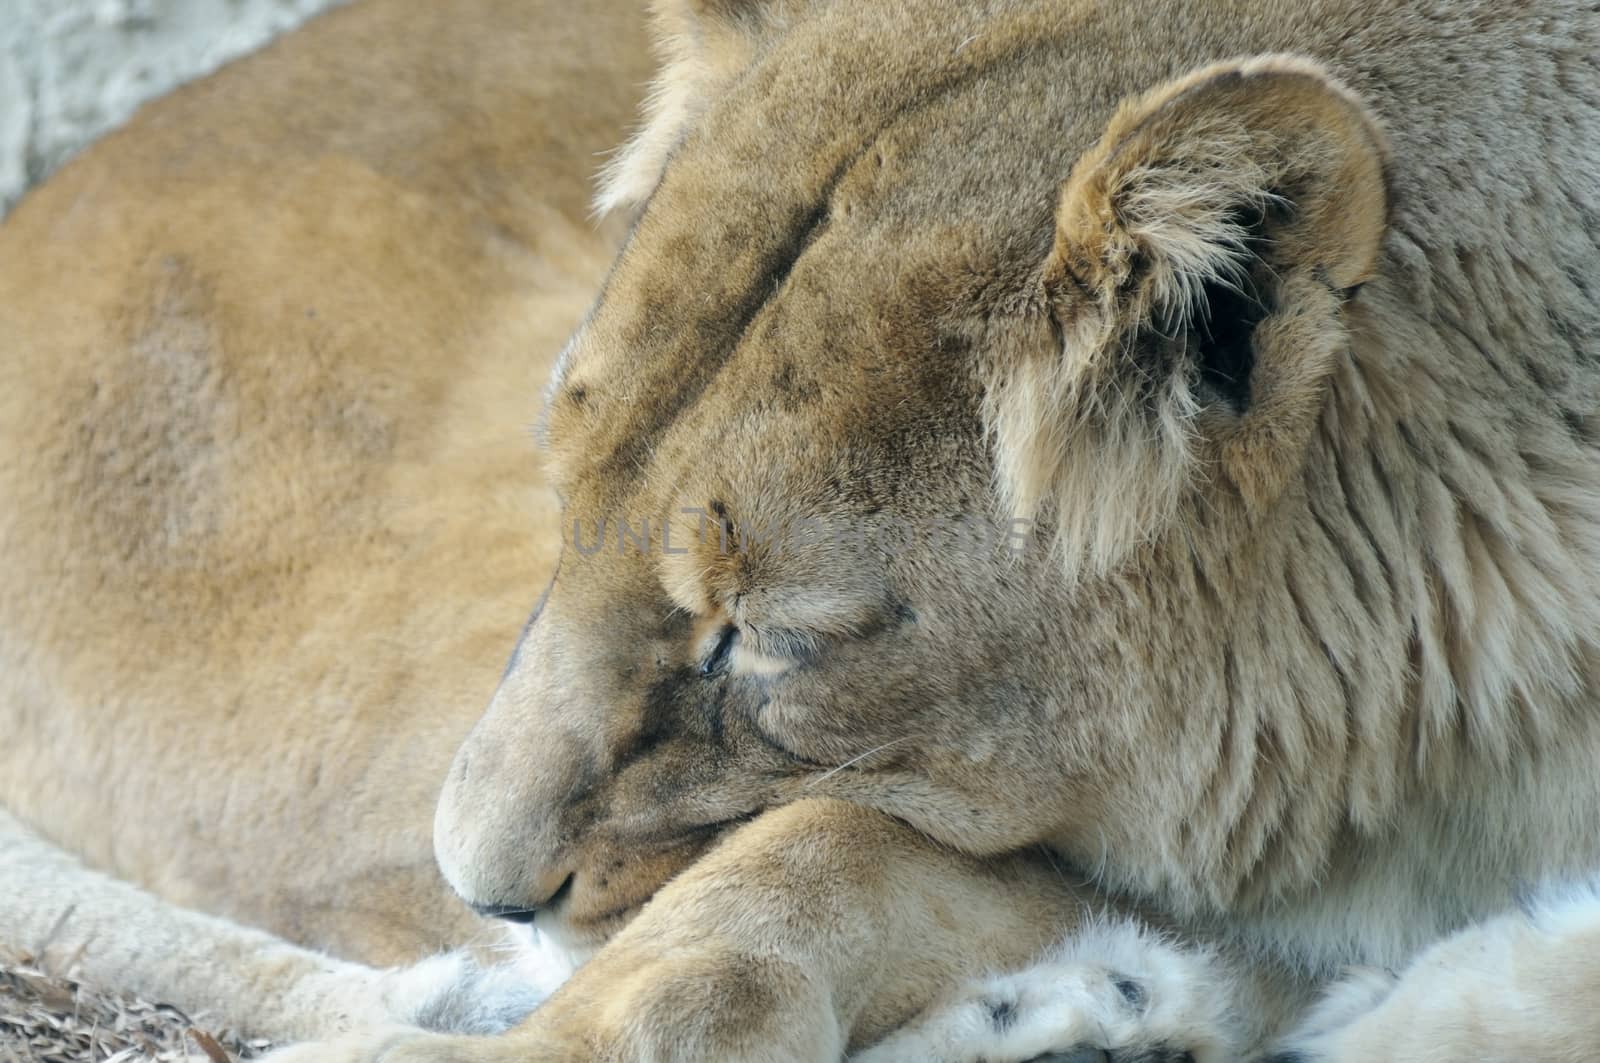 Sleeping lion by kmwphotography